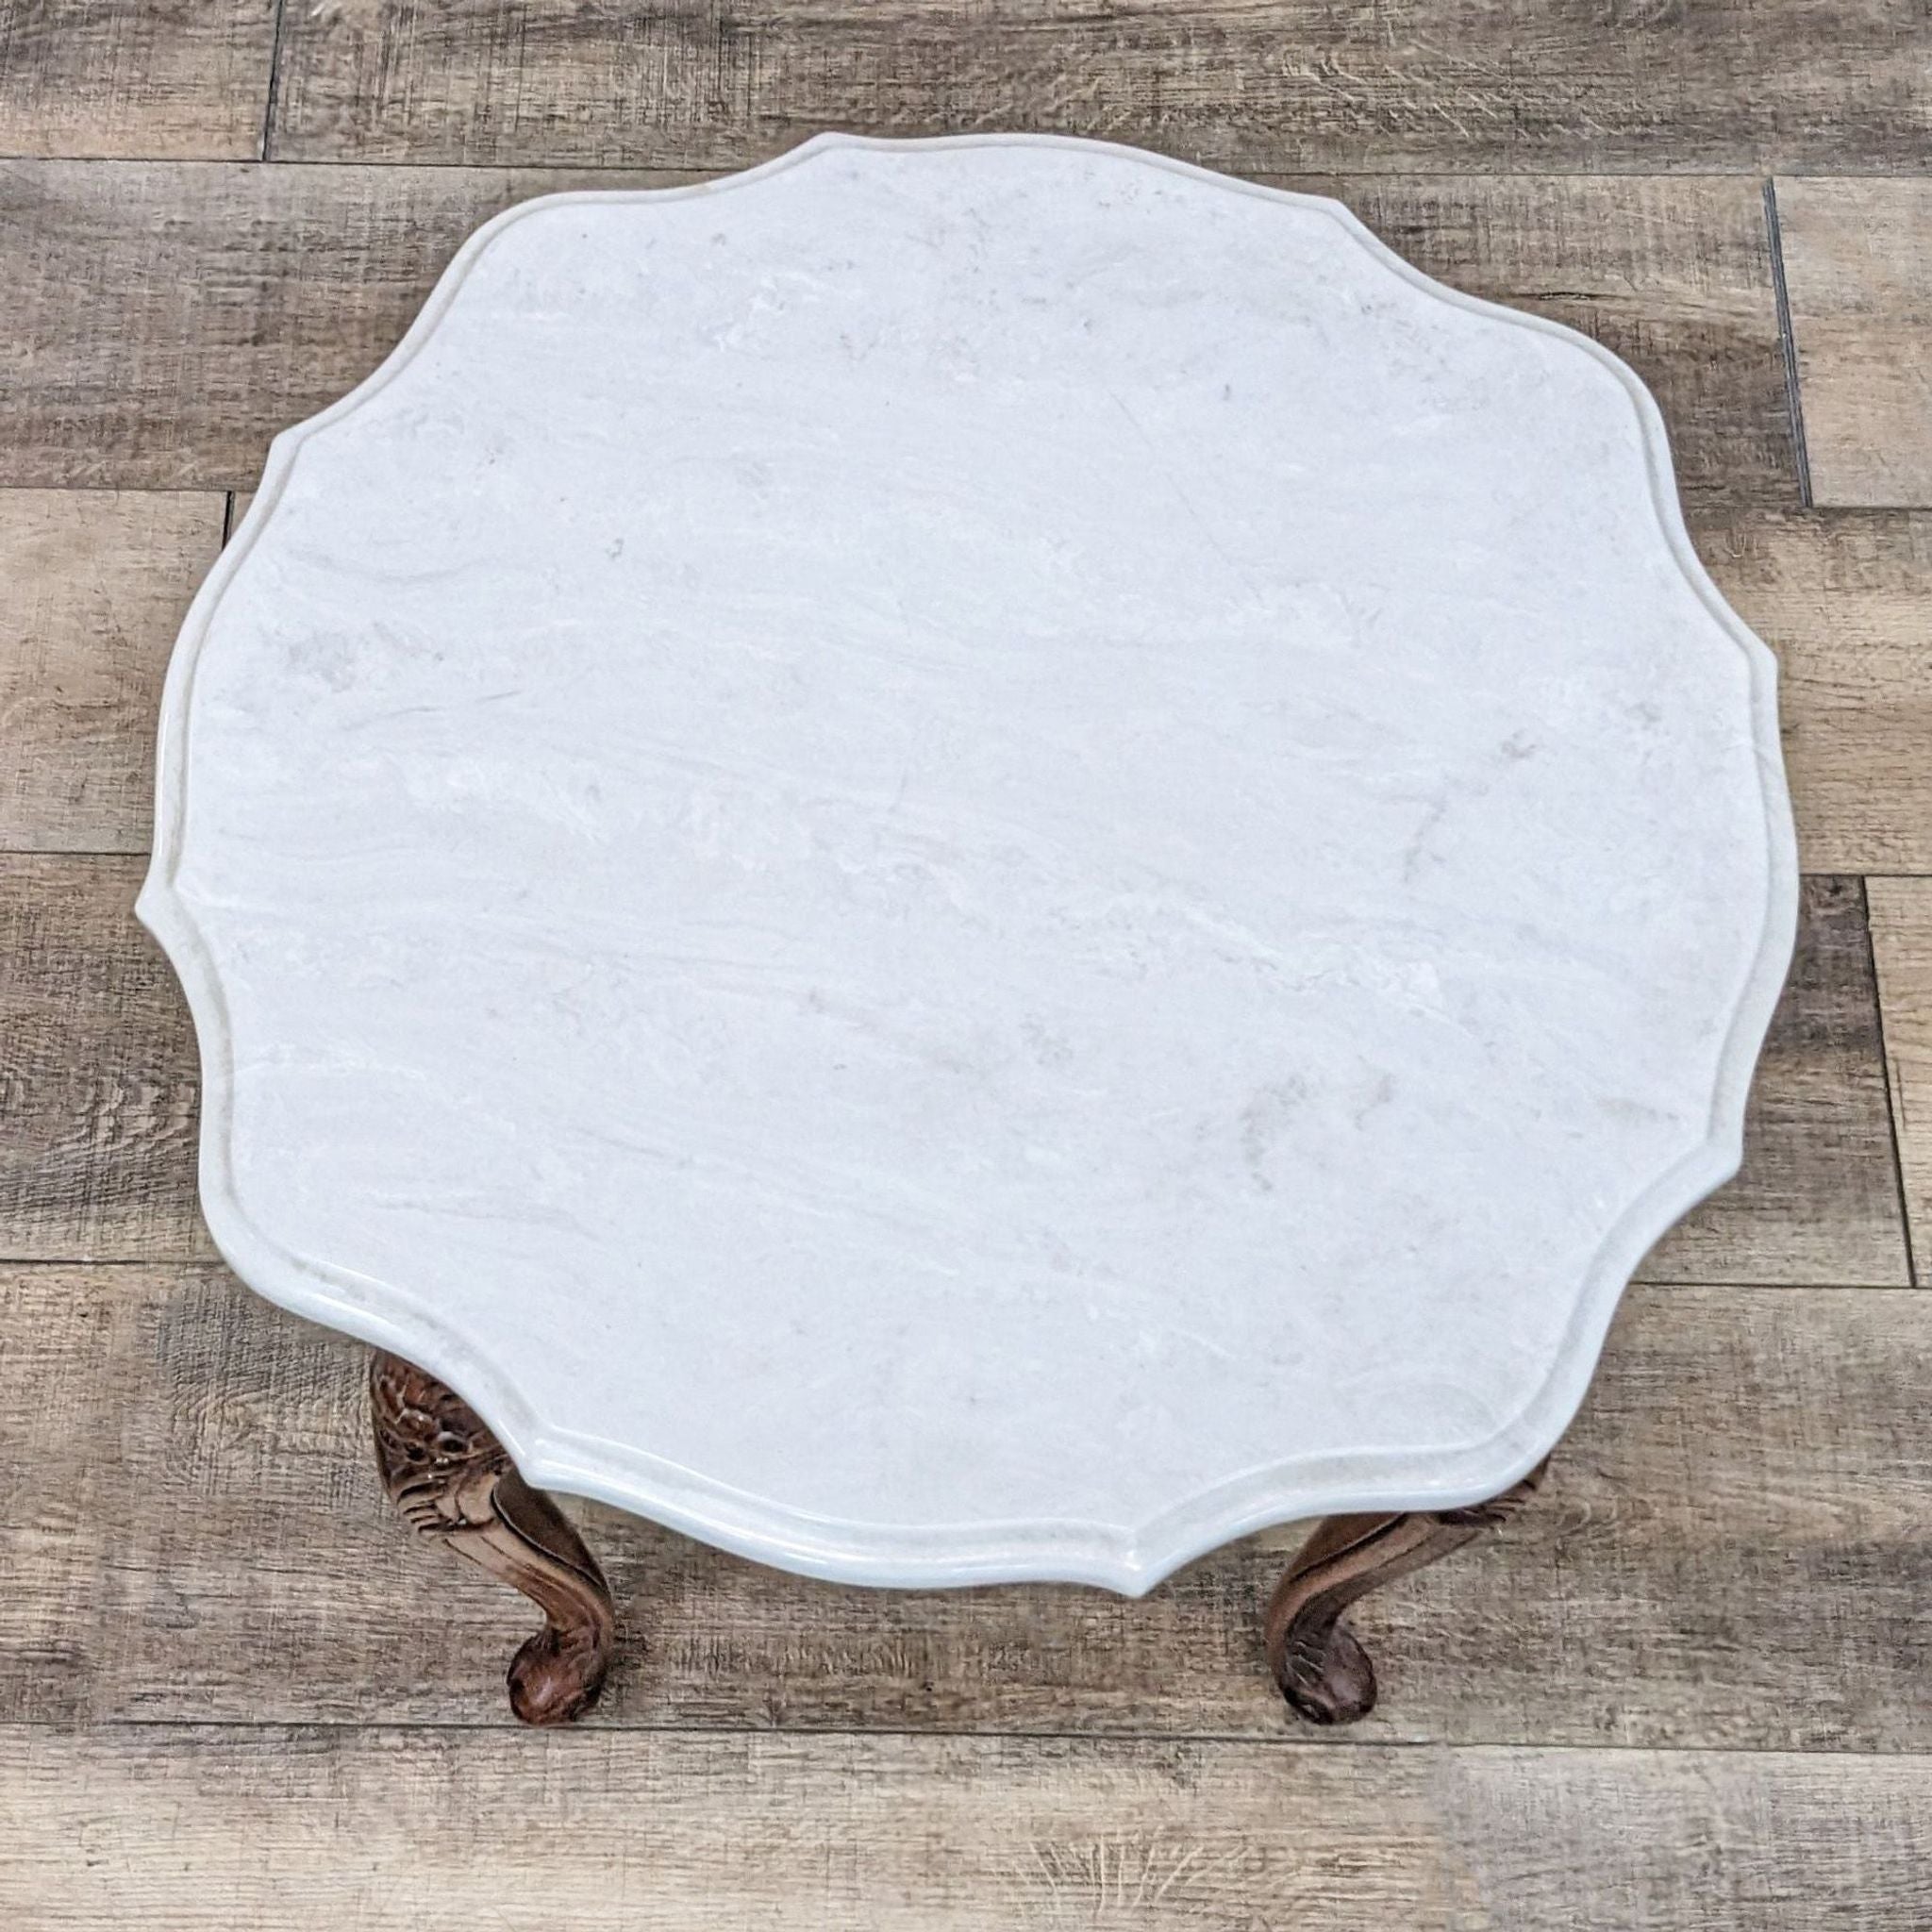 Image 3: Top view of a Reperch end table with scalloped marble surface and ornate wood details visible.